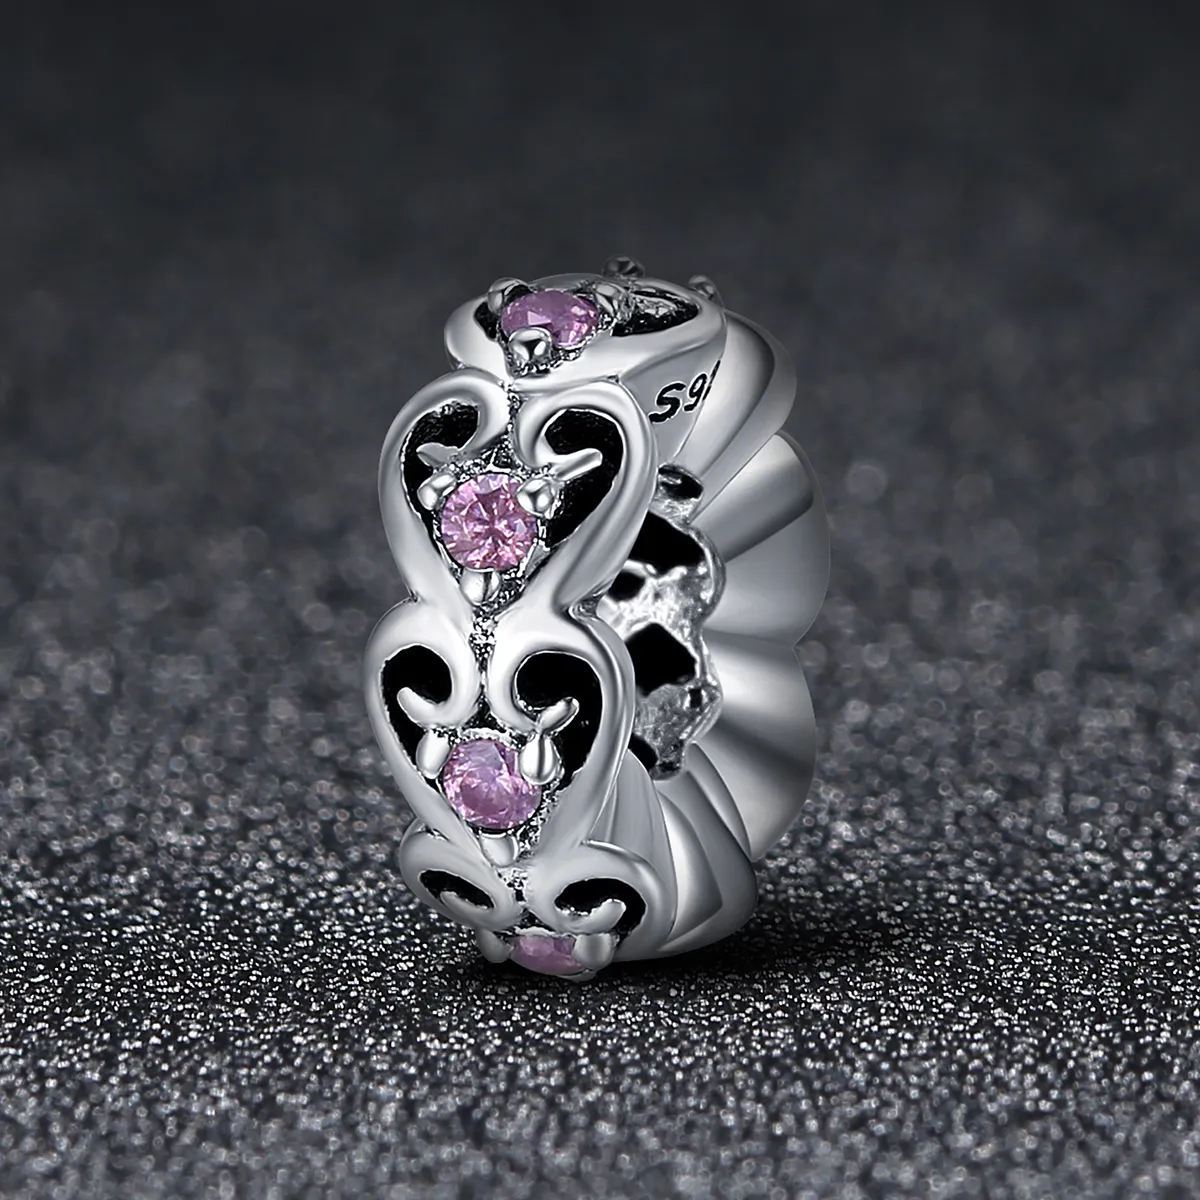 Pandora Style Silver Heart Shape Spacer Charm - SCC339